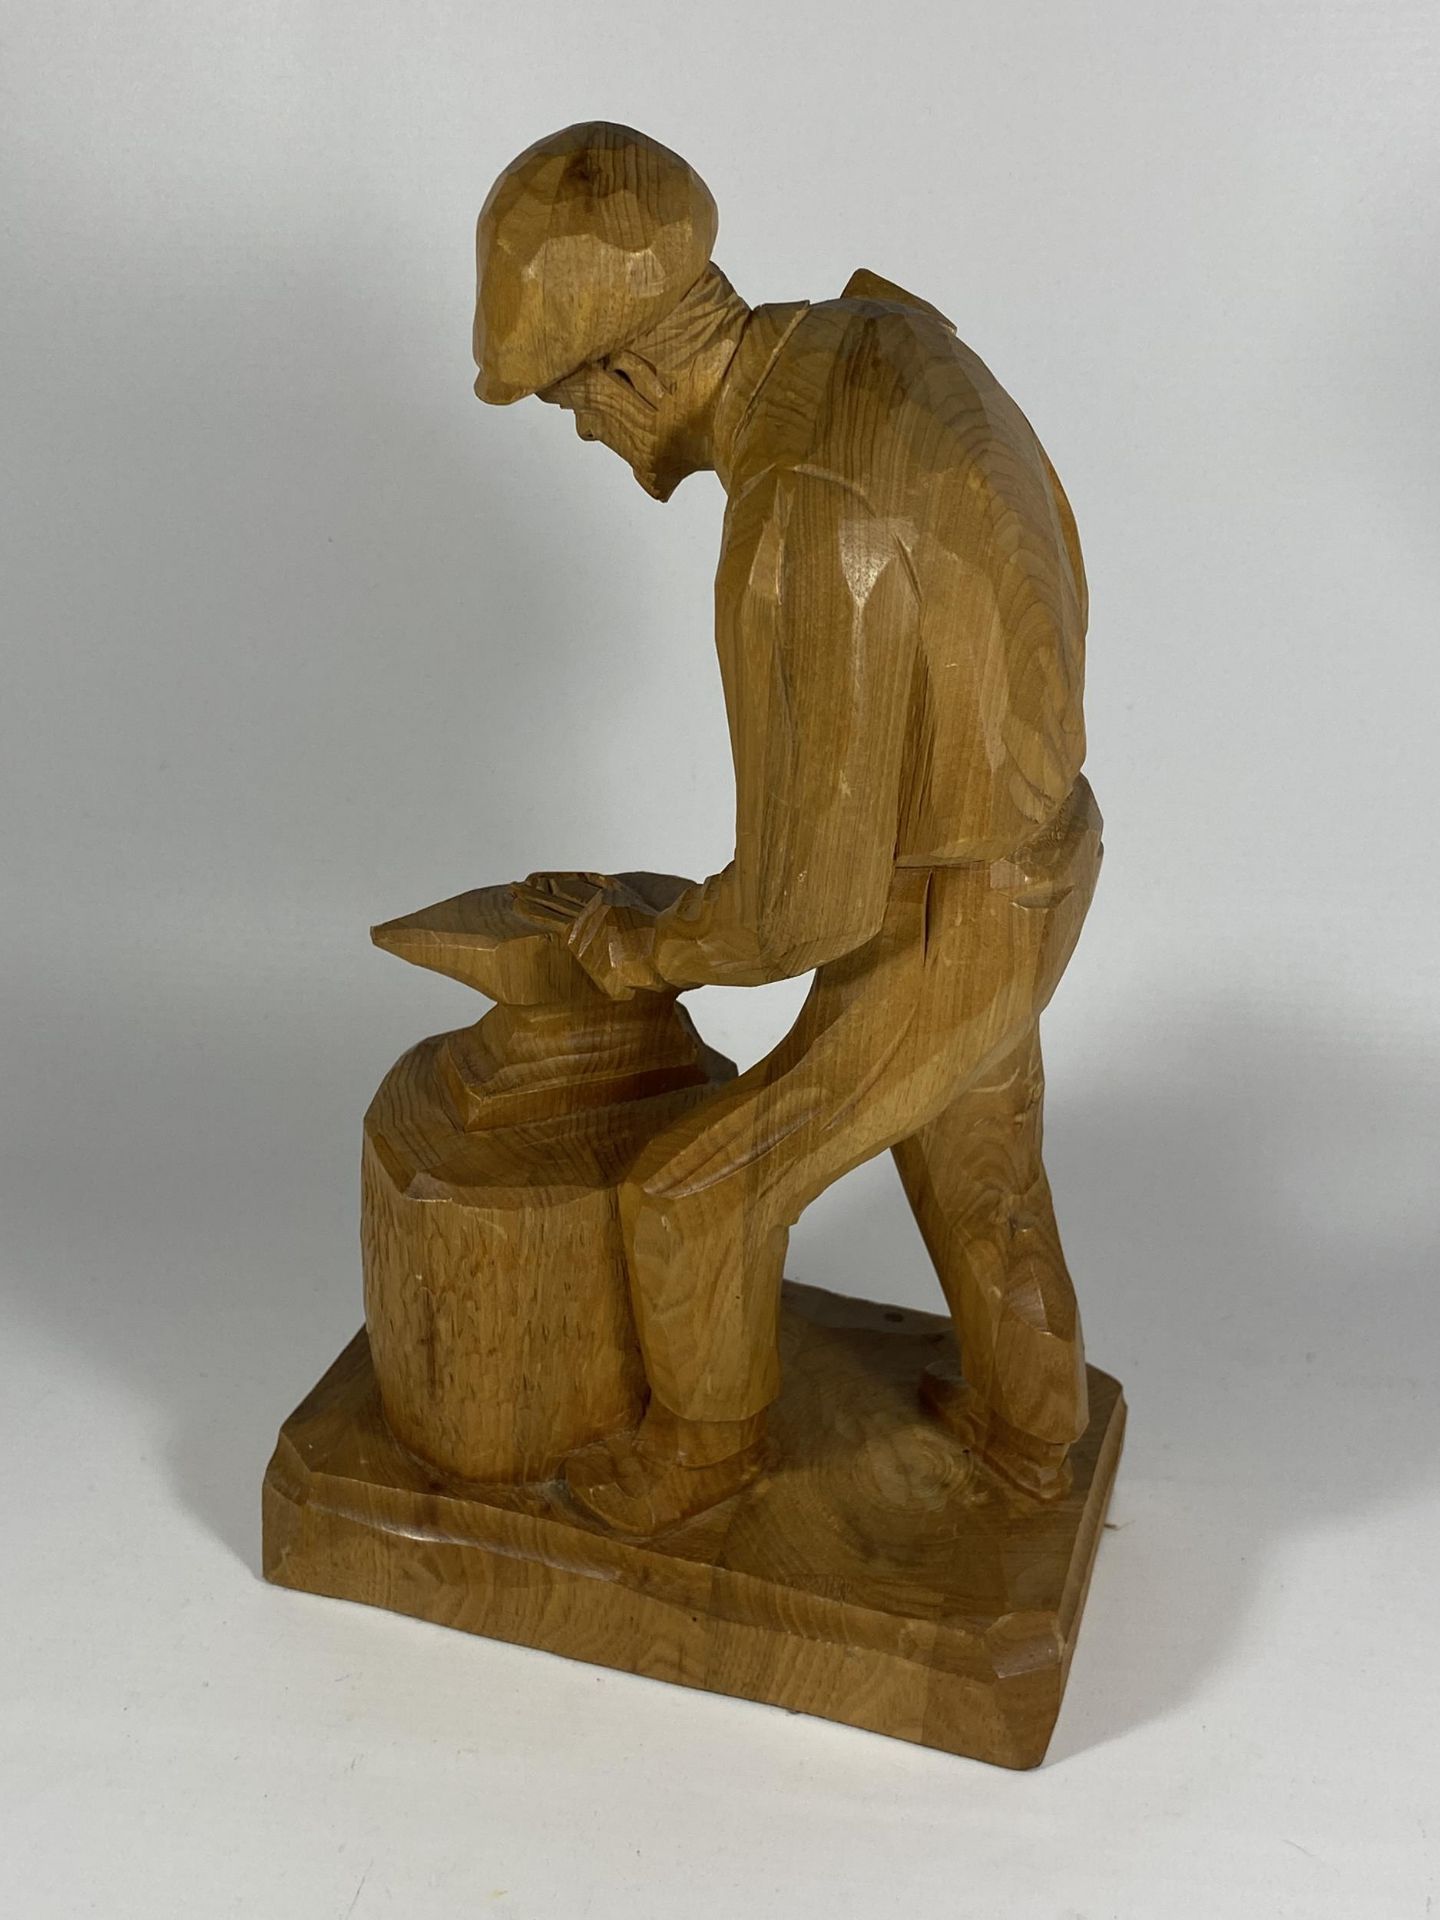 A CARVED WOODEN MODEL OF A BLACKSMITH - Image 3 of 3